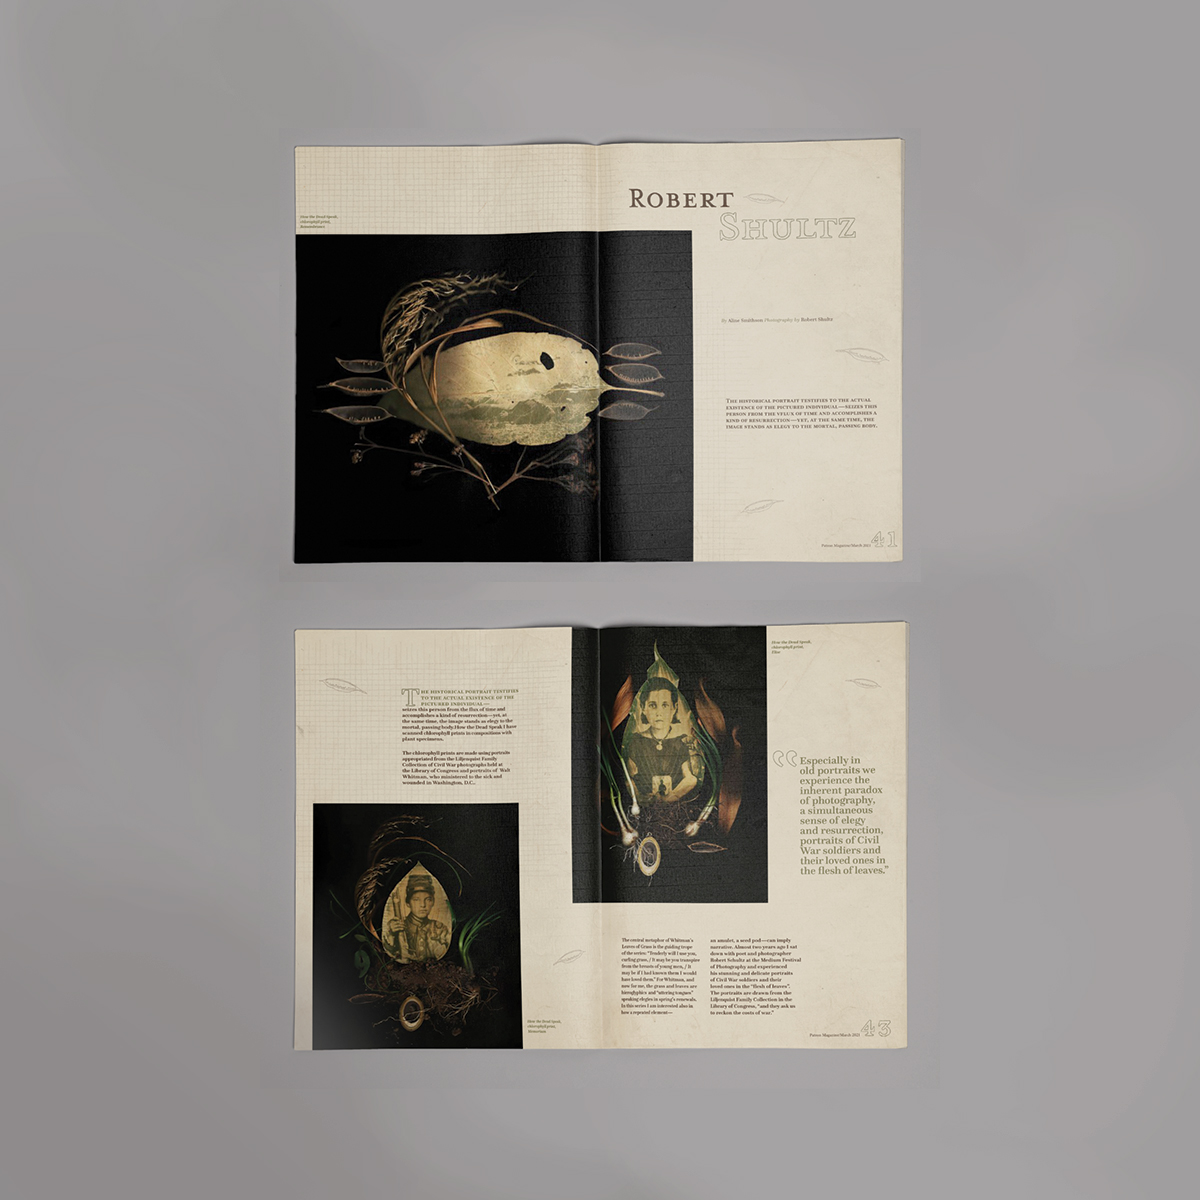 These spreads feature an earthy color palette of muted tones, and display photos of chlorophyll prints on leaves surrounded by various brush and twigs. There is a pencil-drawn grid with a few drawn nut shells in addition to the copy and photography.